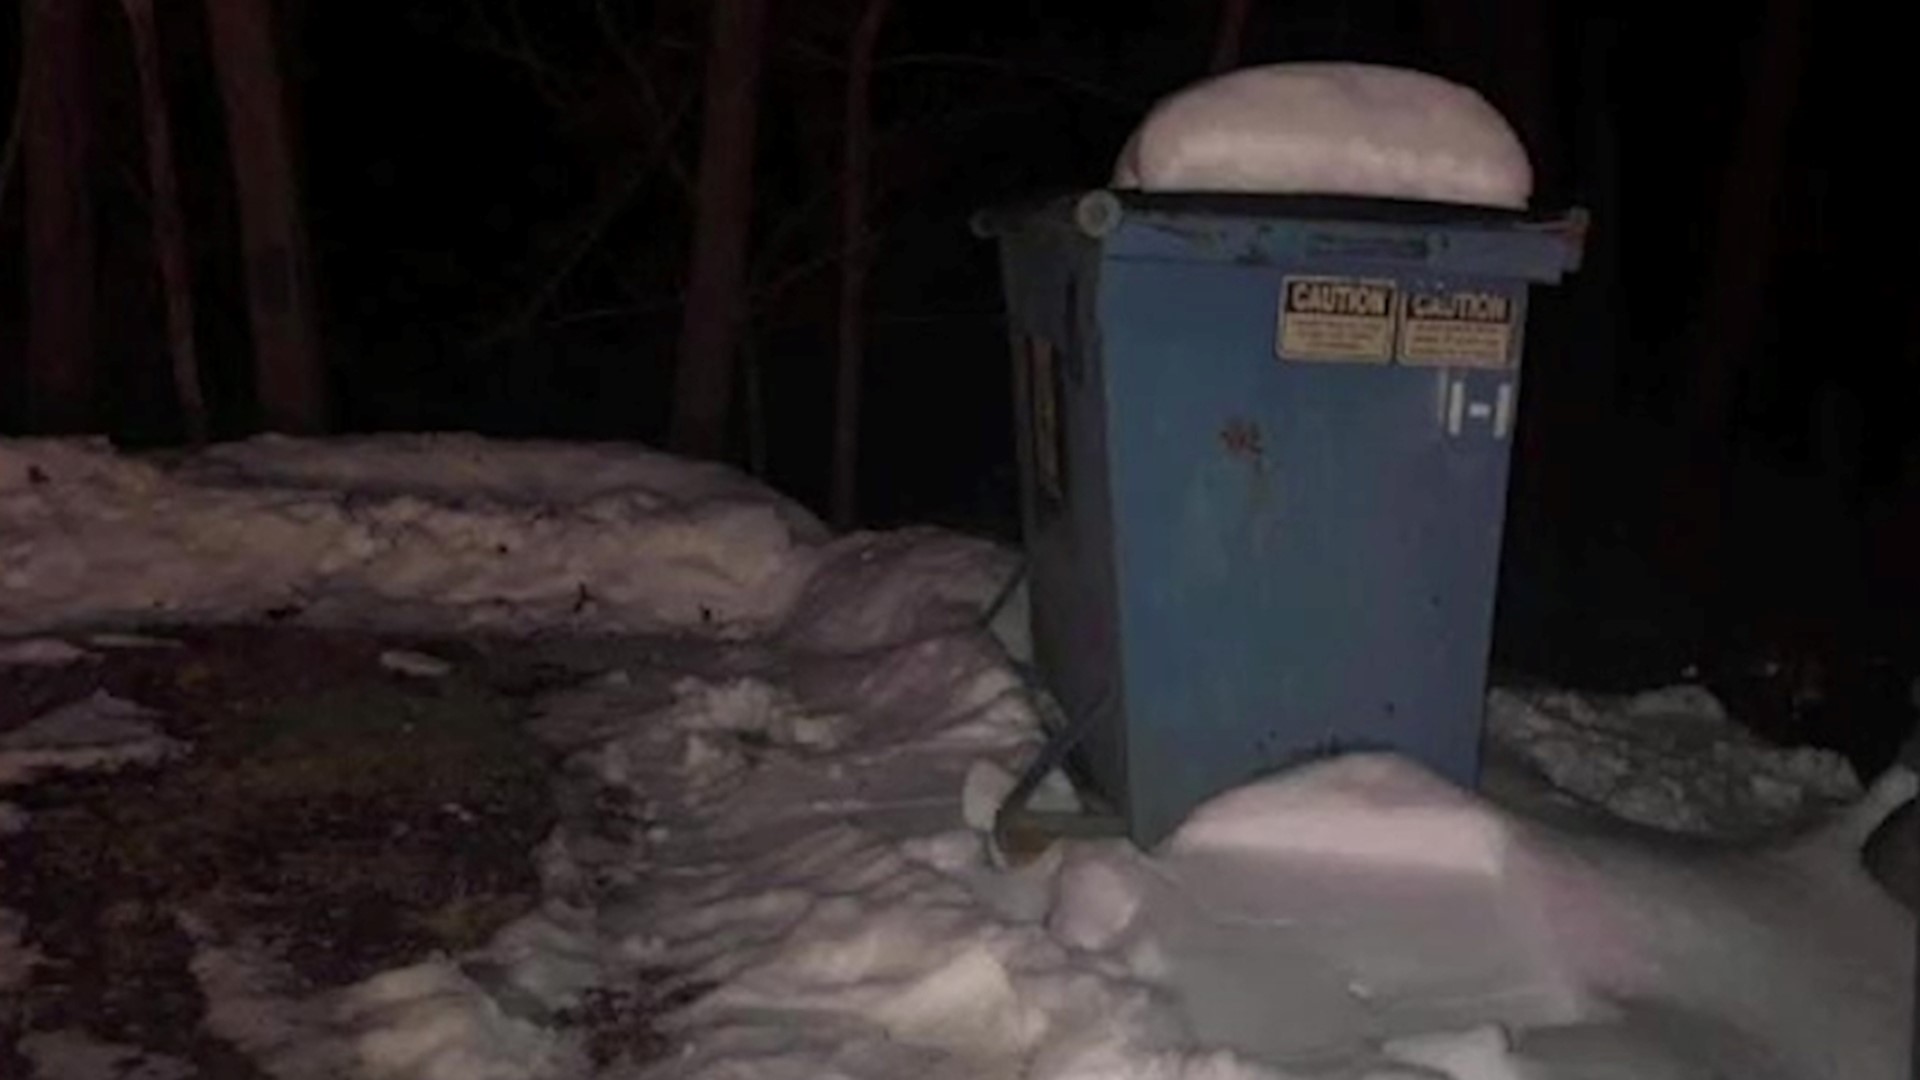 Cats were left in taped box behind a dumpster in a snowdrift.